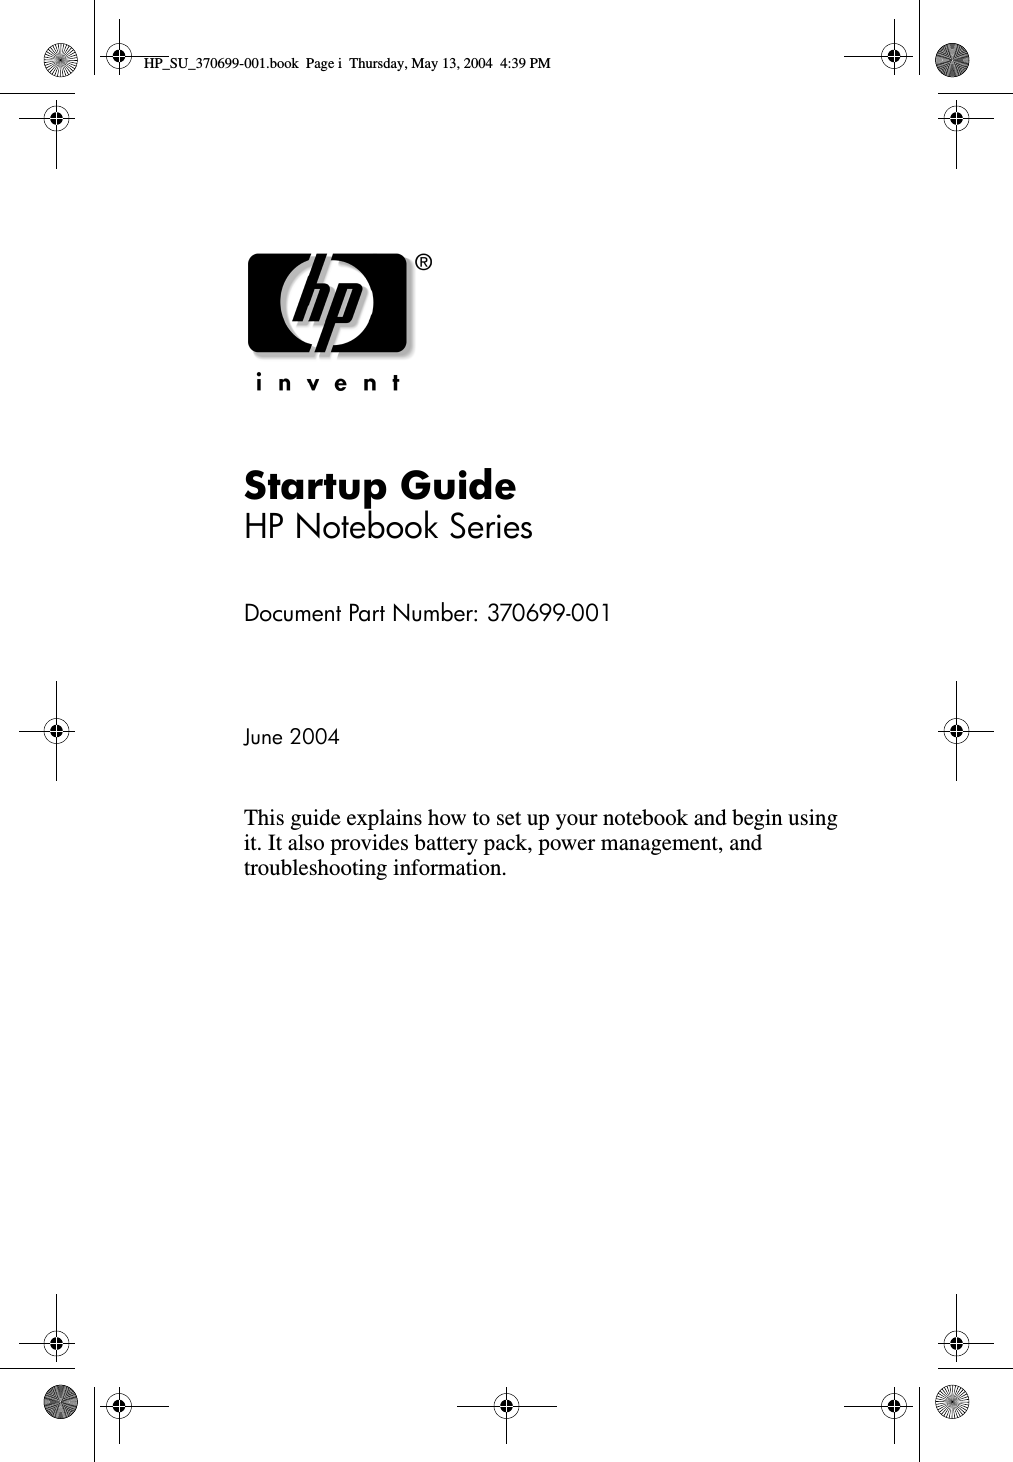 Startup GuideHP Notebook SeriesDocument Part Number: 370699-001June 2004This guide explains how to set up your notebook and begin using it. It also provides battery pack, power management, and troubleshooting information.HP_SU_370699-001.book  Page i  Thursday, May 13, 2004  4:39 PM